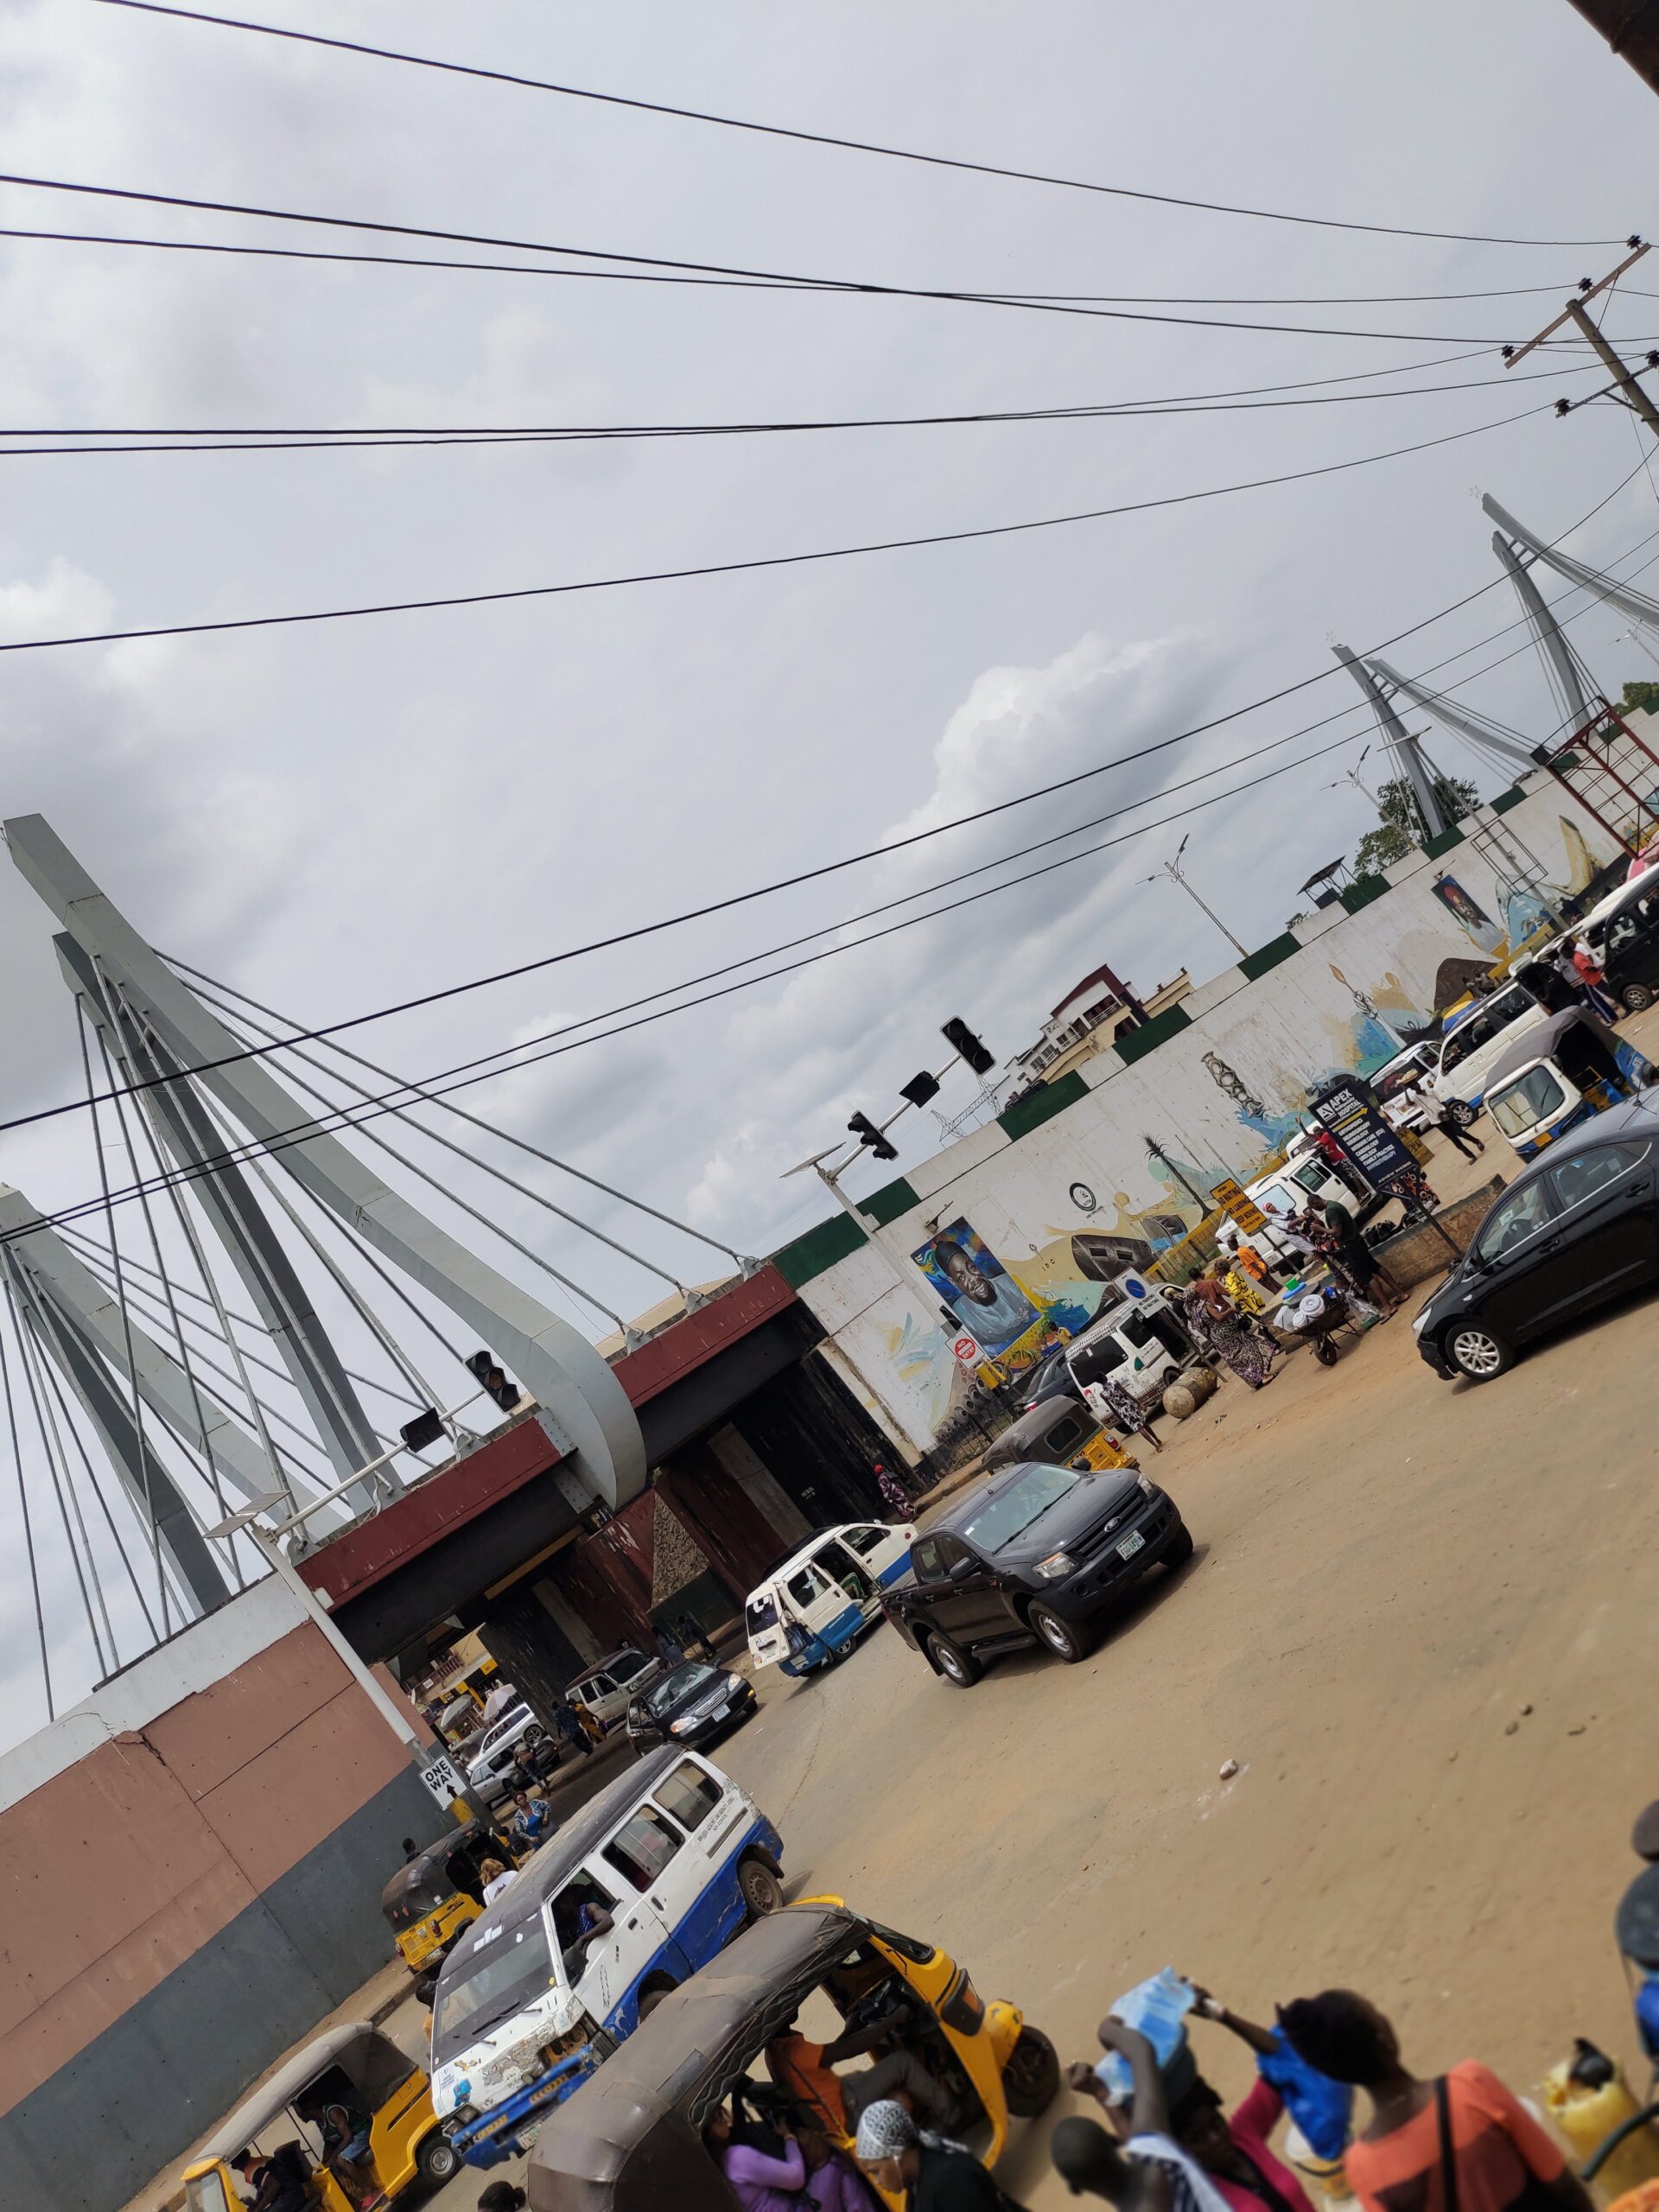 Aroma Junction Shooting Adds to Rising Insecurity in Awka, Anambra State